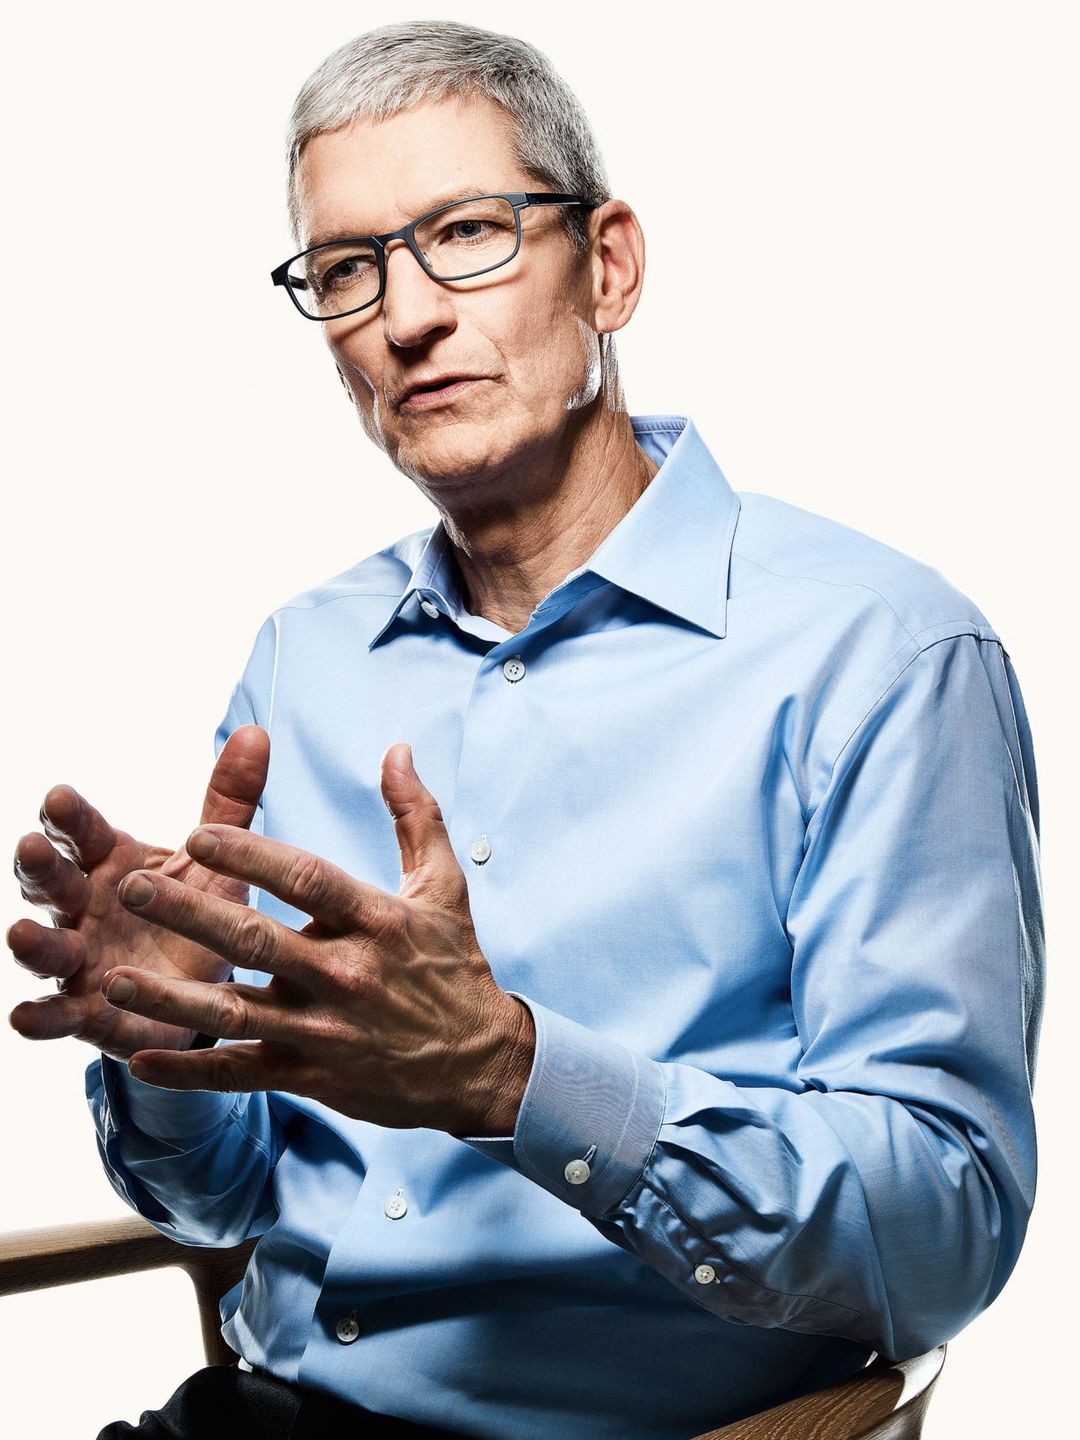 Tim Cook who is his father